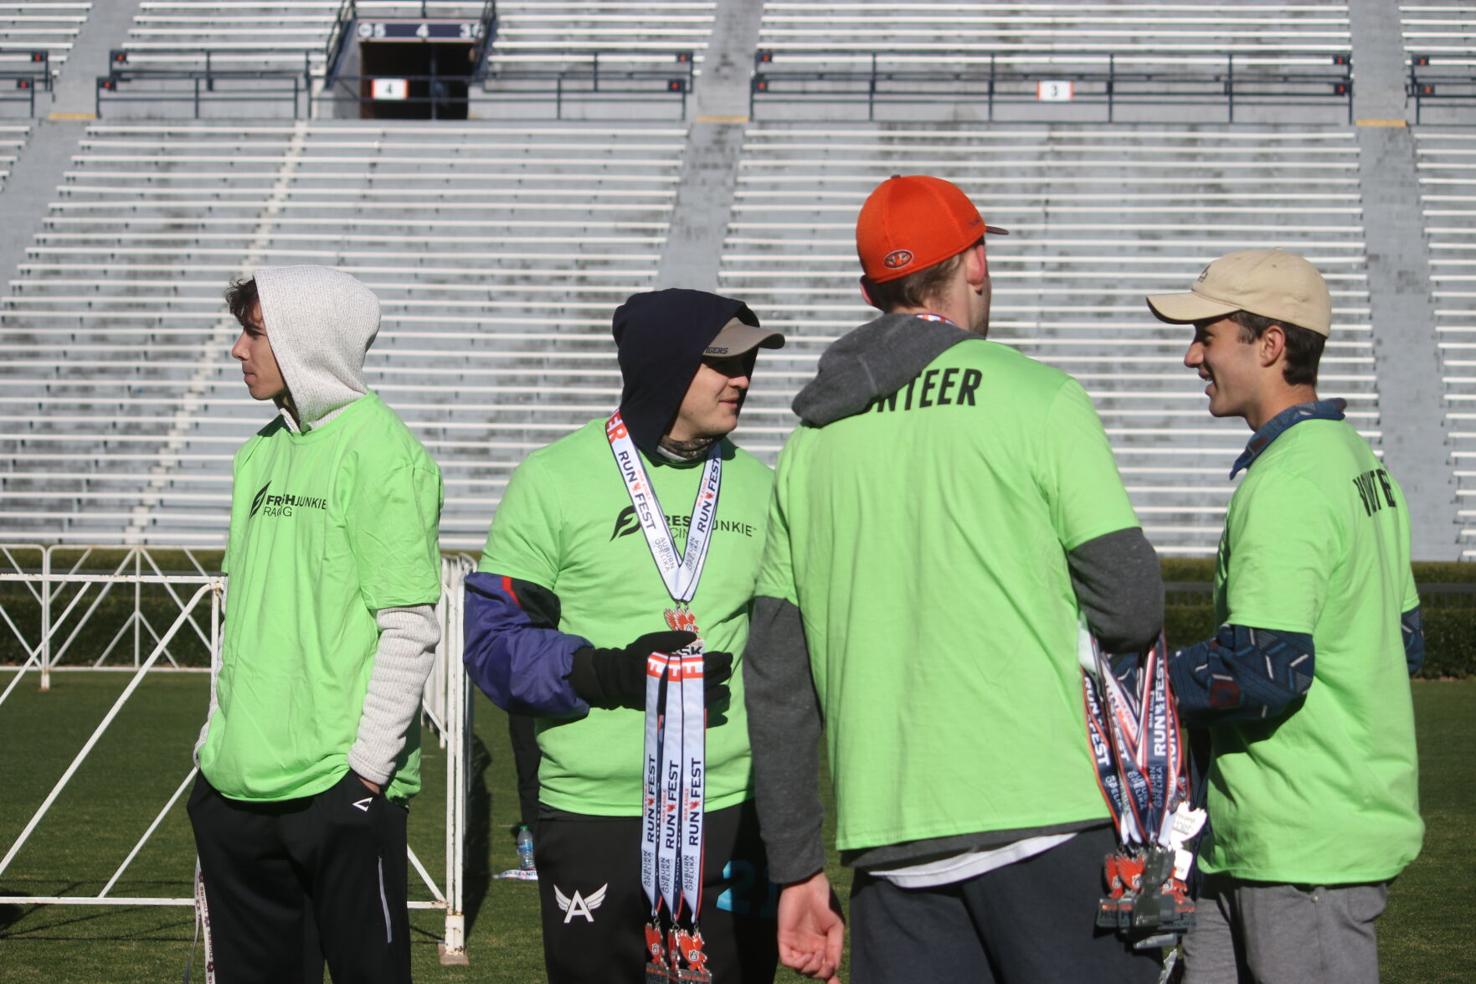 GALLERY Photos from the 2022 War Eagle Run Fest